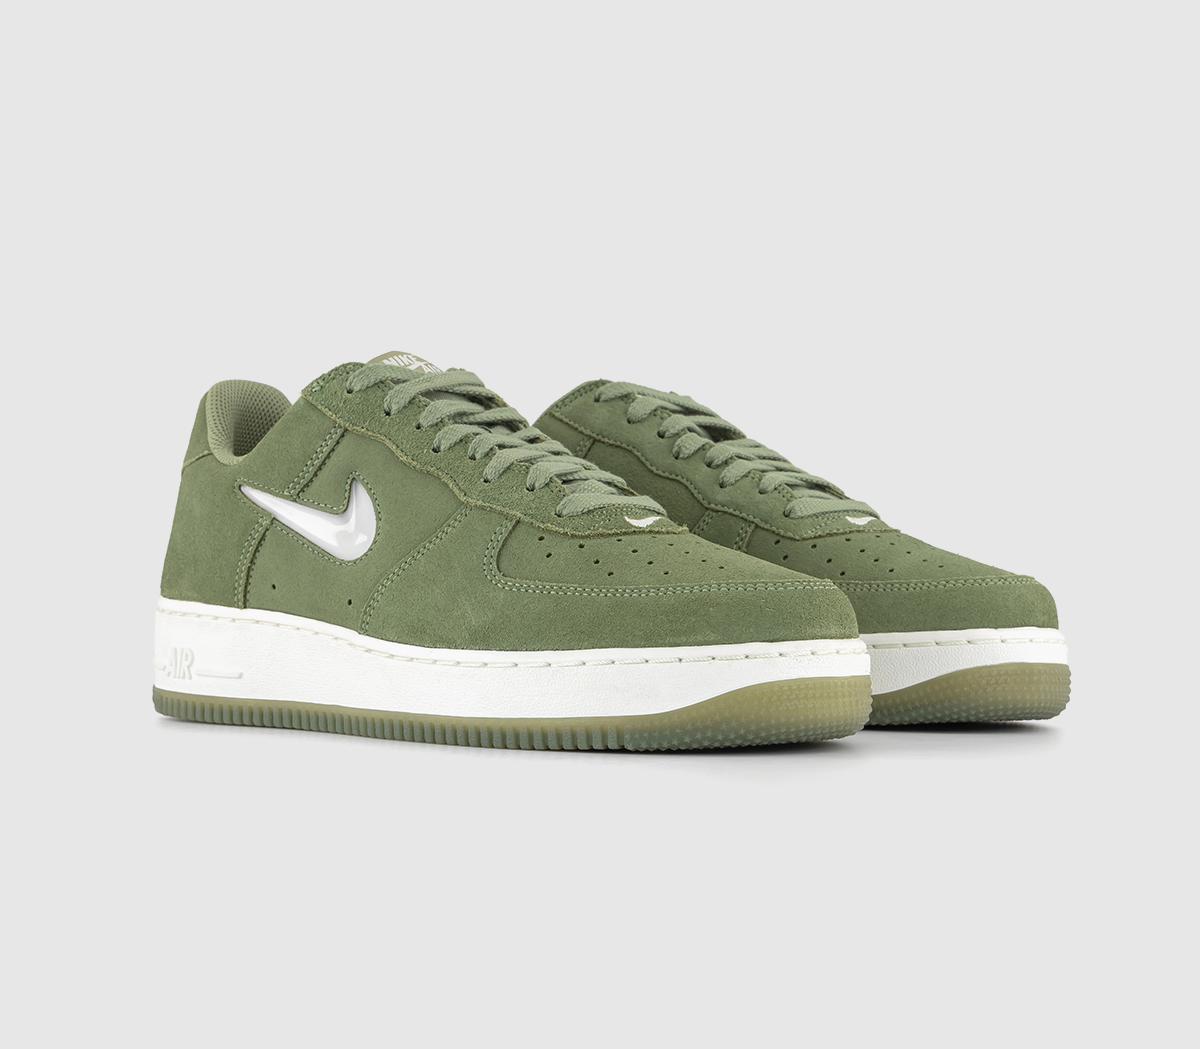 Nike Air Force 1 07 Trainers Oil Green Summit White, 10.5